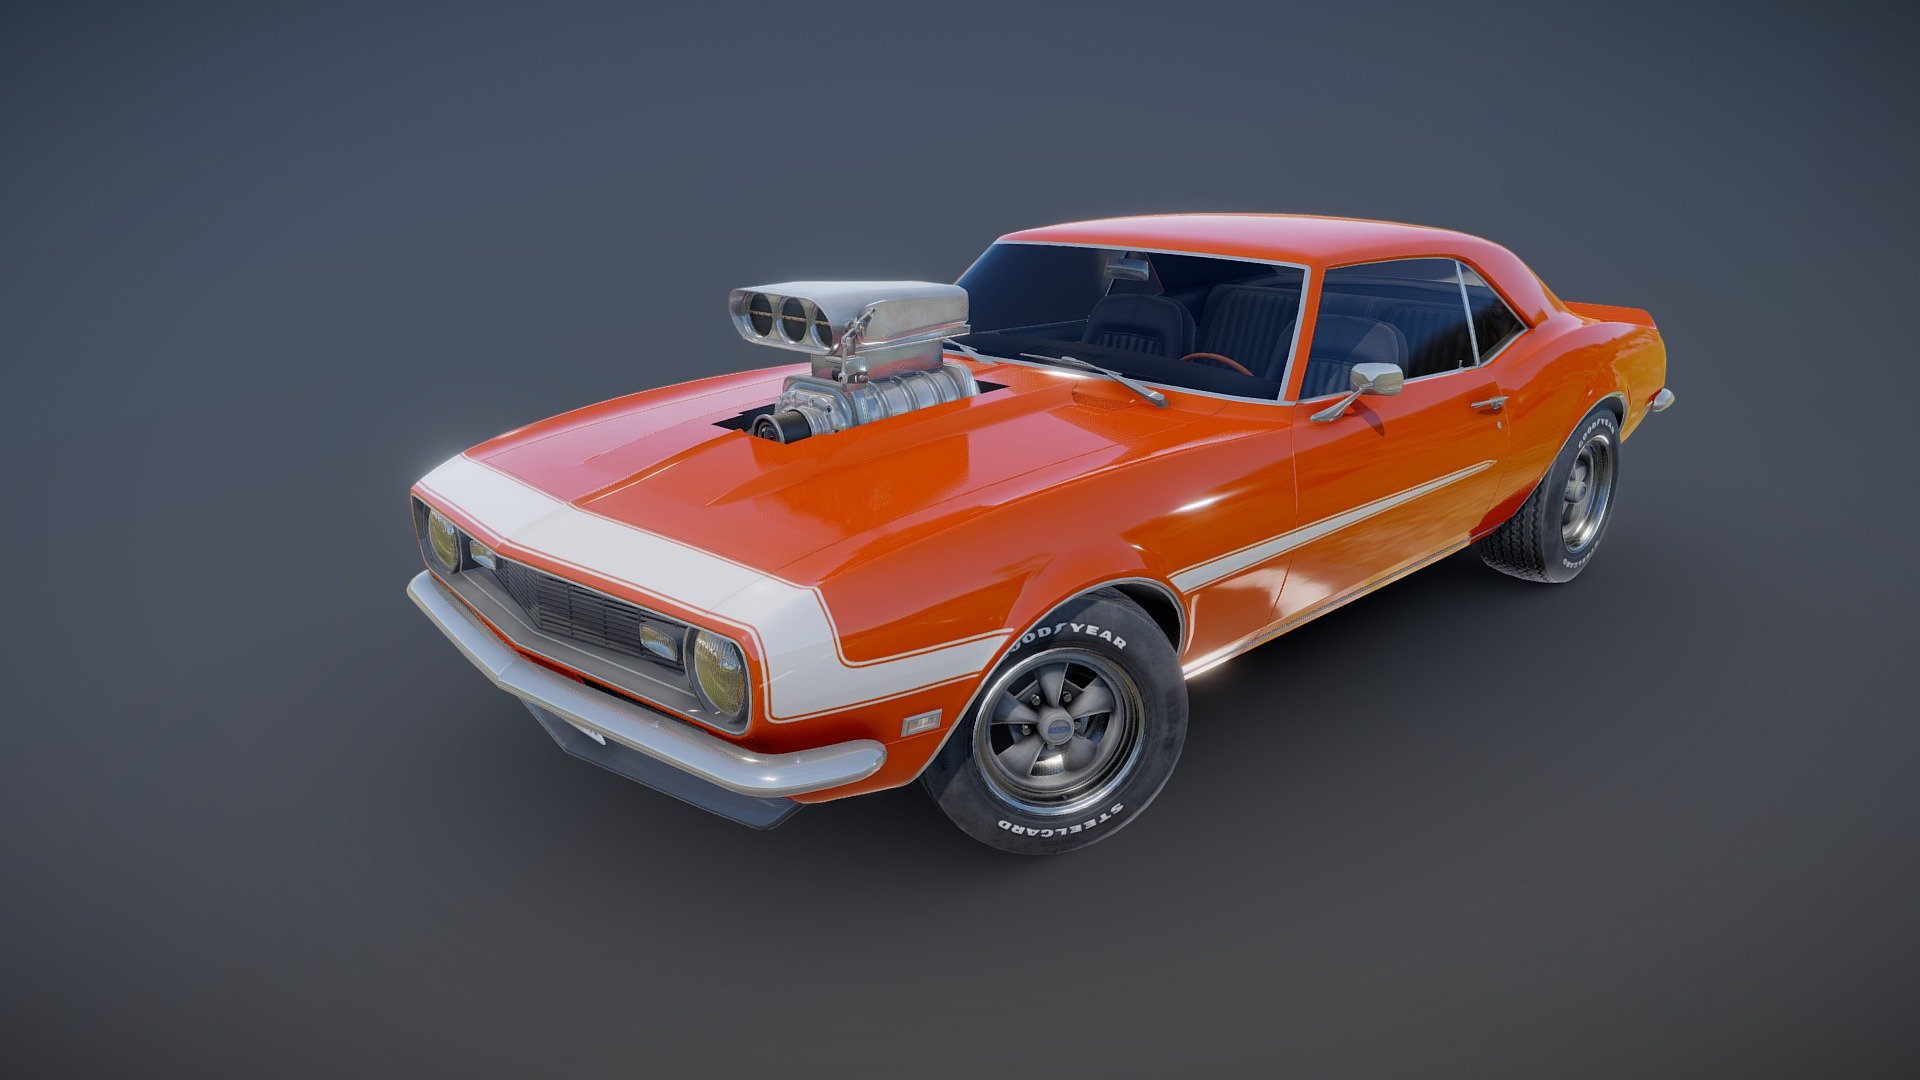 American muscle car game ready model.

Full textured model with clean topology.

High accuracy exterior model.

High detailed cabin - seams, rivets, chrome parts, wipers and etc.

High detailed rims and tires, with PBR maps(Base_Color/Metallic/Normal/Roughness.png2048x2048 )

Original scale.

Original scale. Lenght 4.7m , width 1.8m , height 1.32m.

Model ready for real-time apps, games, virtual reality and augmented reality.

Asset looks accuracy and realistic and will be a good part of your project 3d model